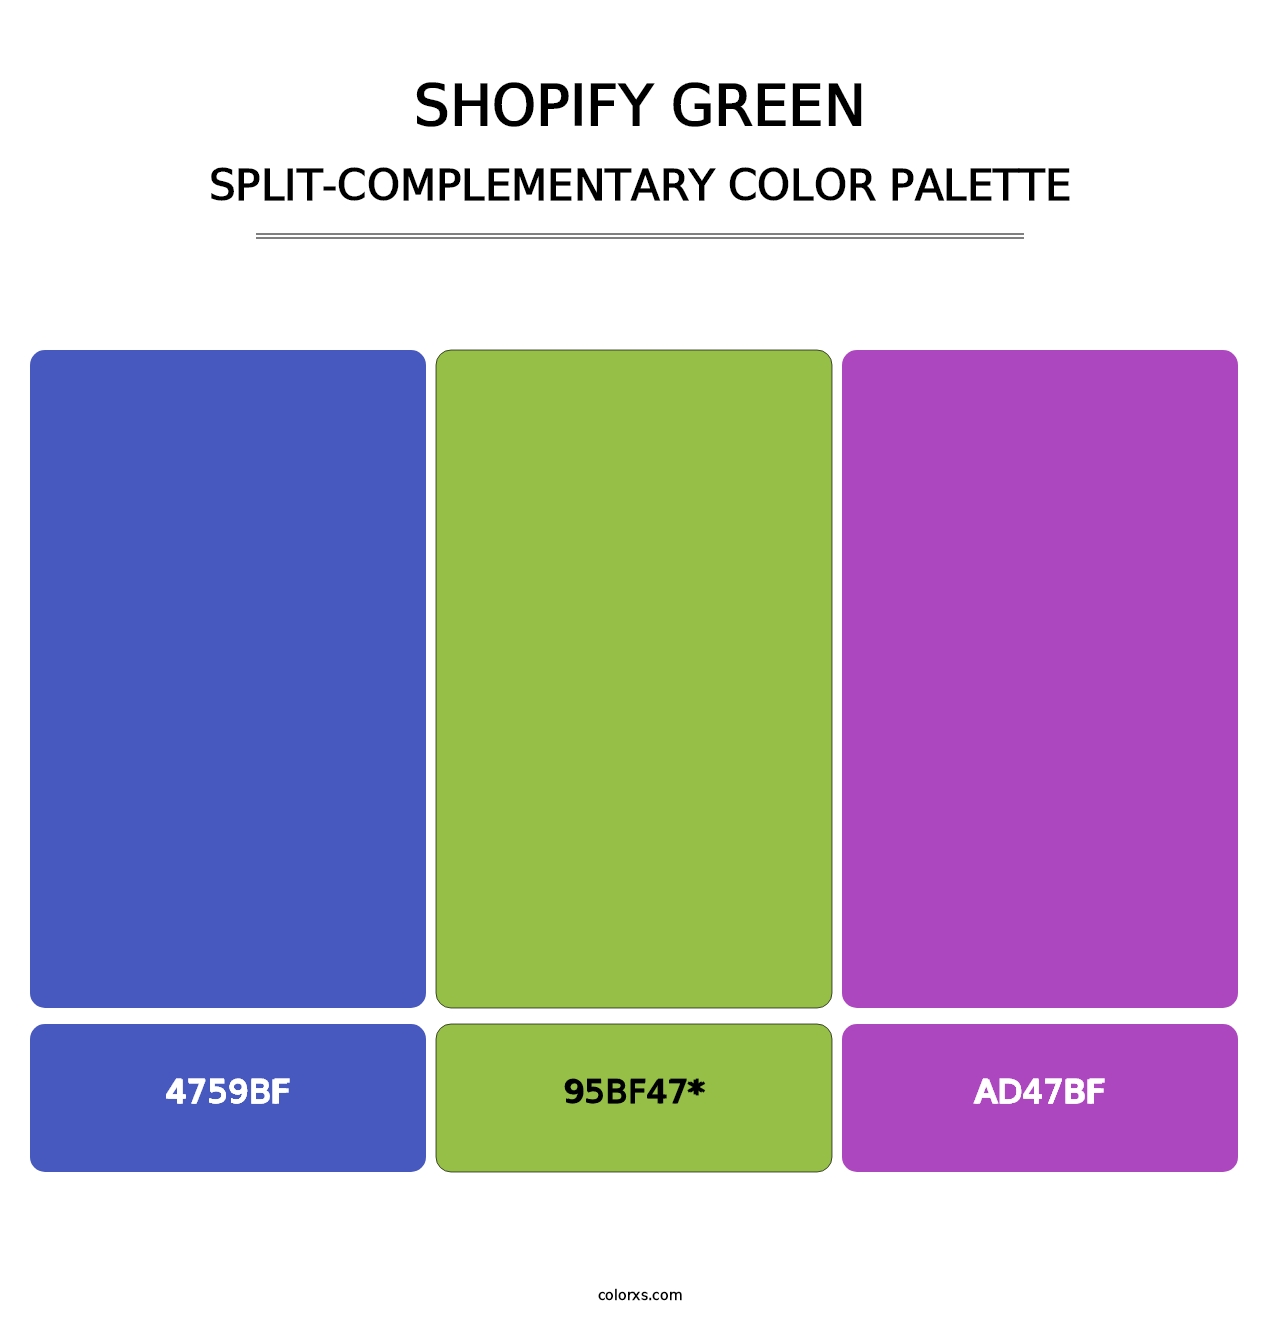 Shopify Green - Split-Complementary Color Palette